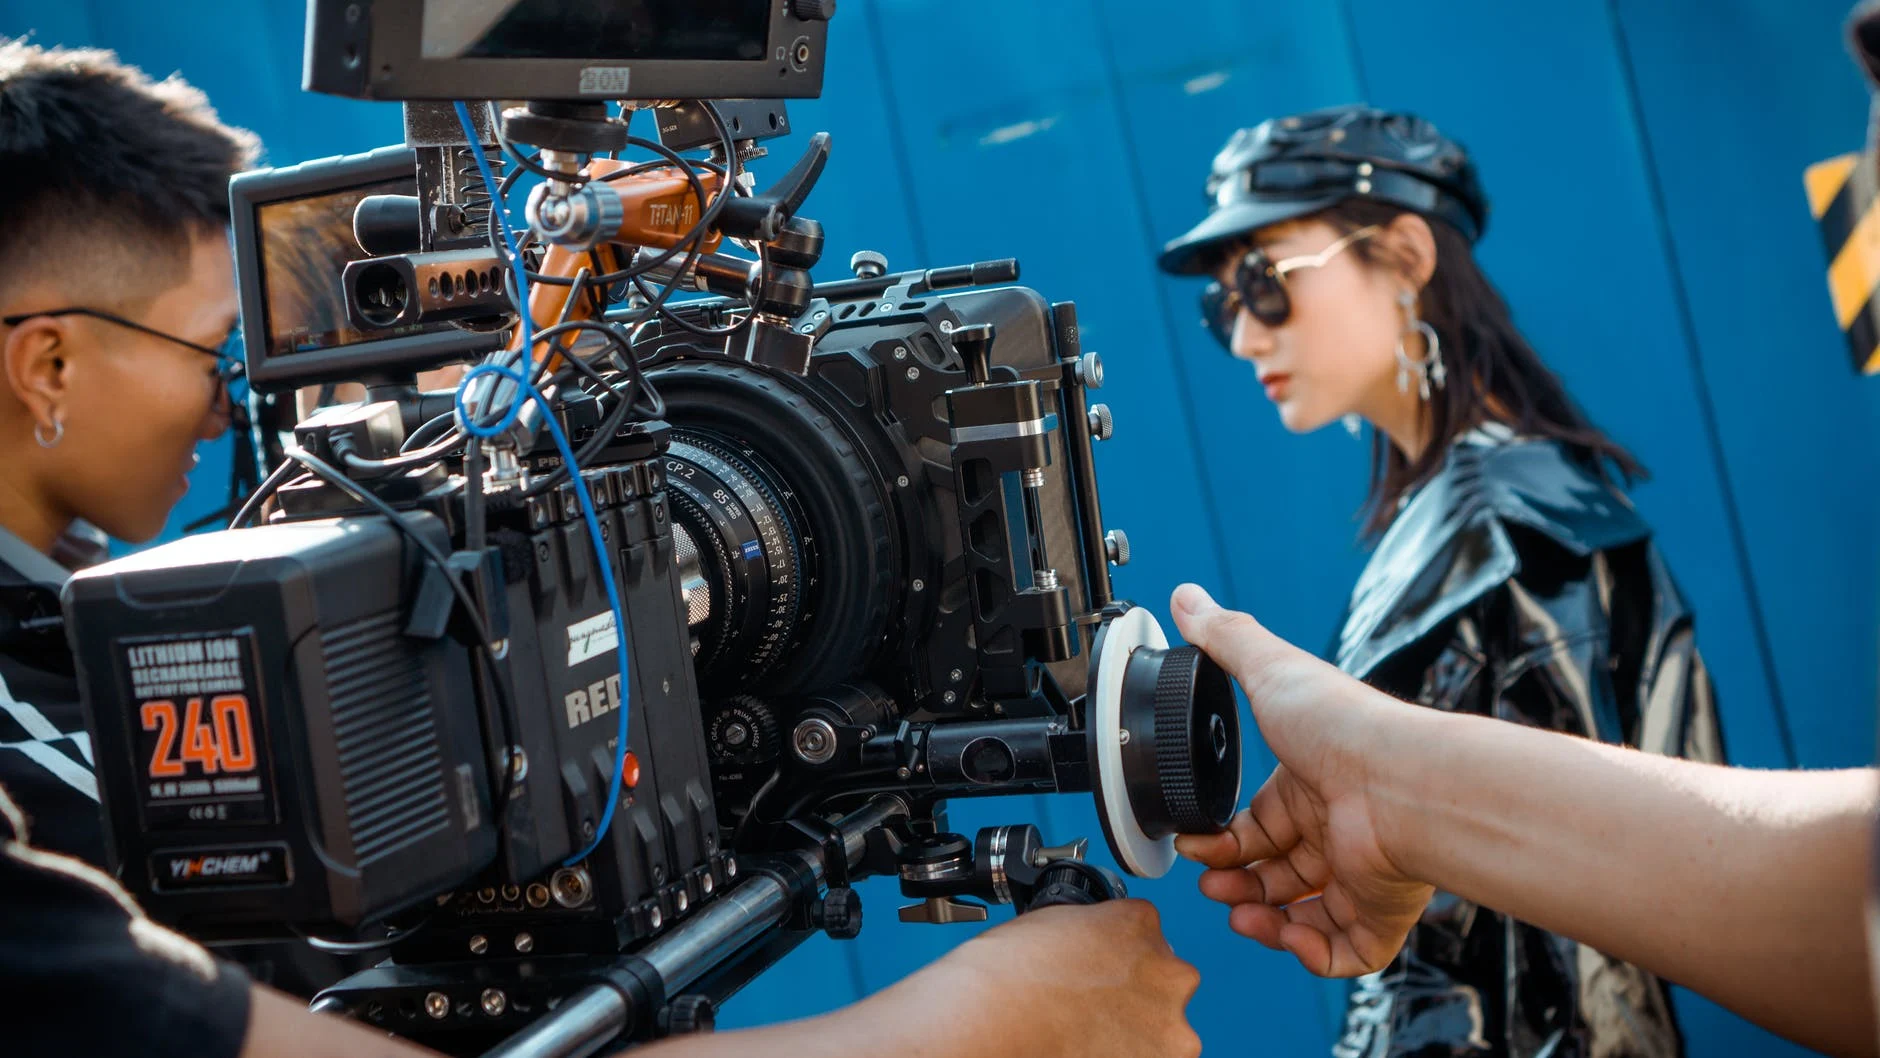 Video Production Companies: How to Market Your Business Online Using Video Production